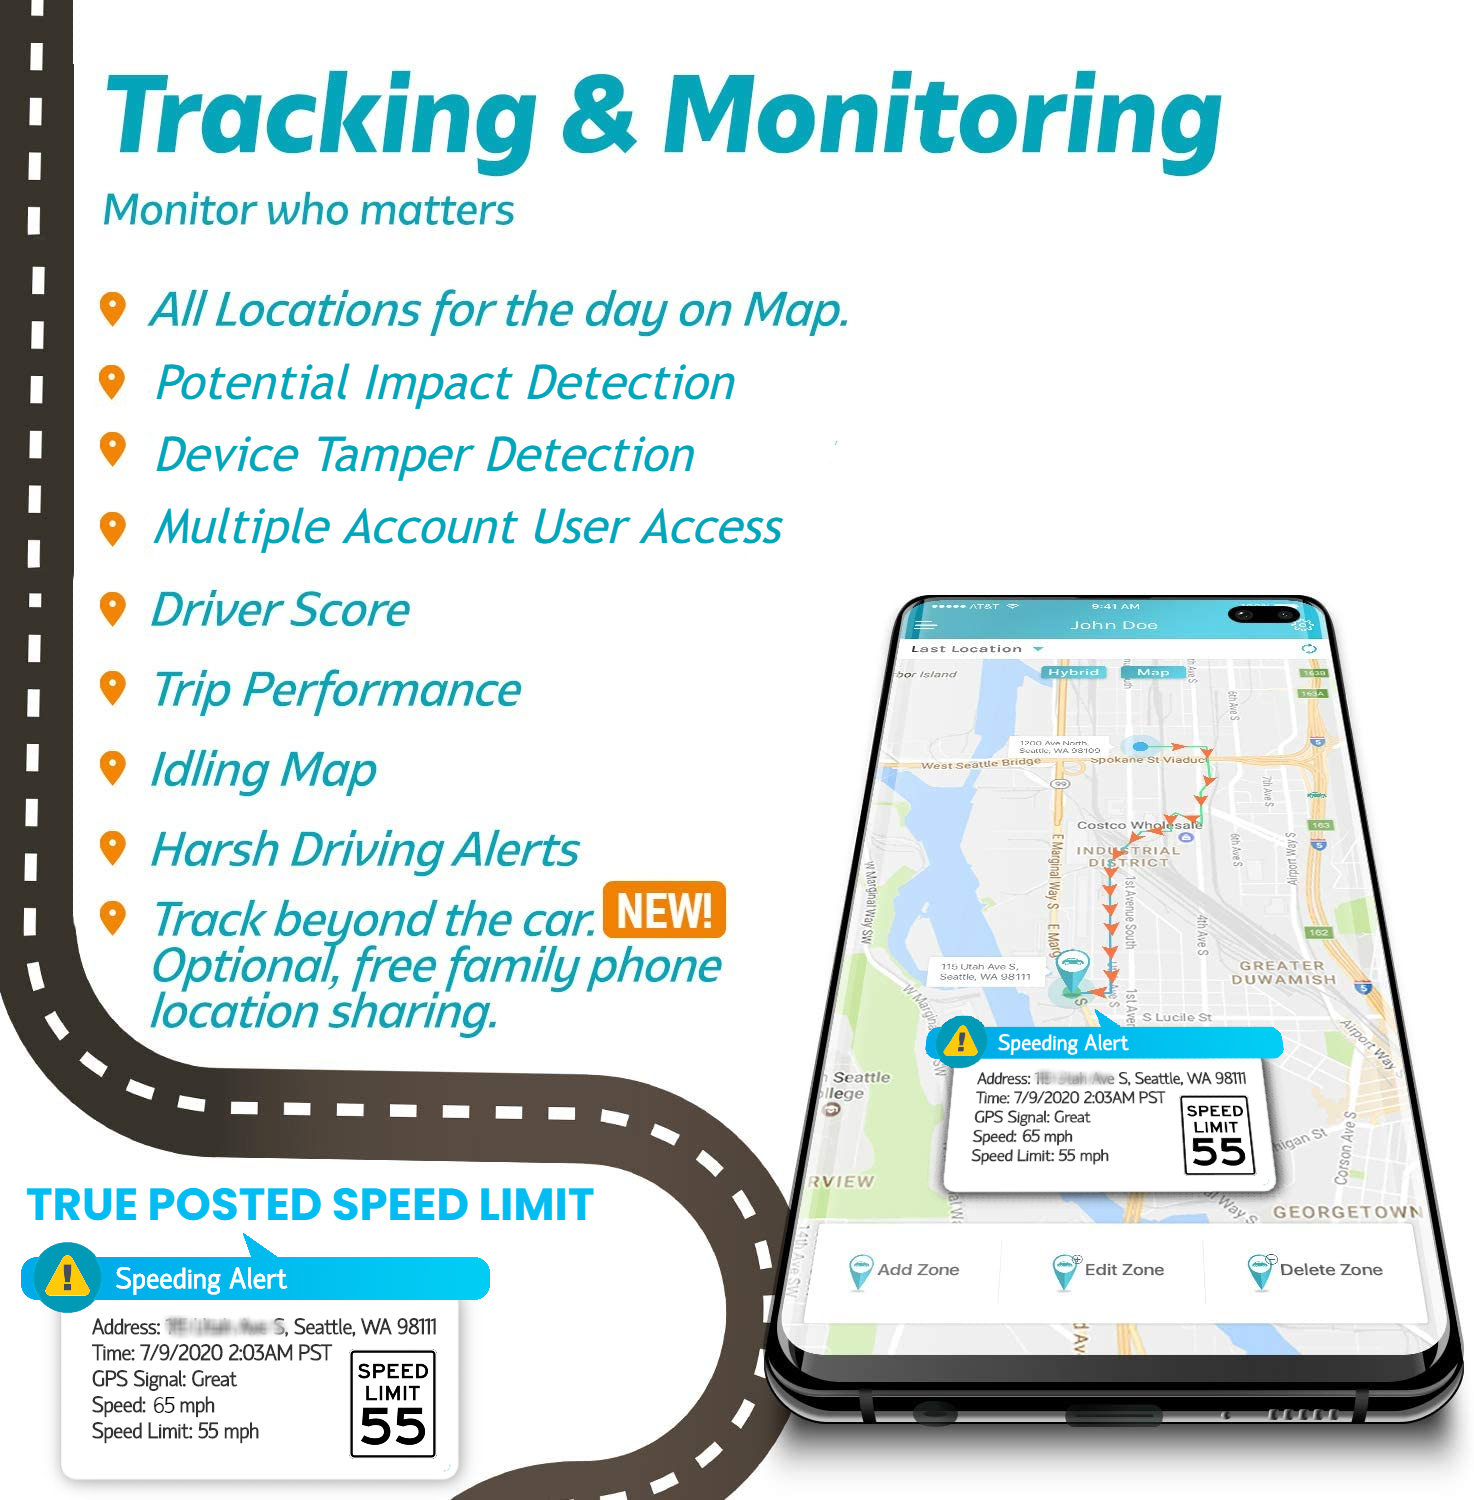 Vyncs - GPS Tracker for Vehicles 4G, No Monthly Fee, Vehicle Location, Trip History, Driving Alerts, GeoFence, Fuel Economy, OBD Fault Codes, USA-Developed, Family or Fleets, Activation Fee Required - image 6 of 7